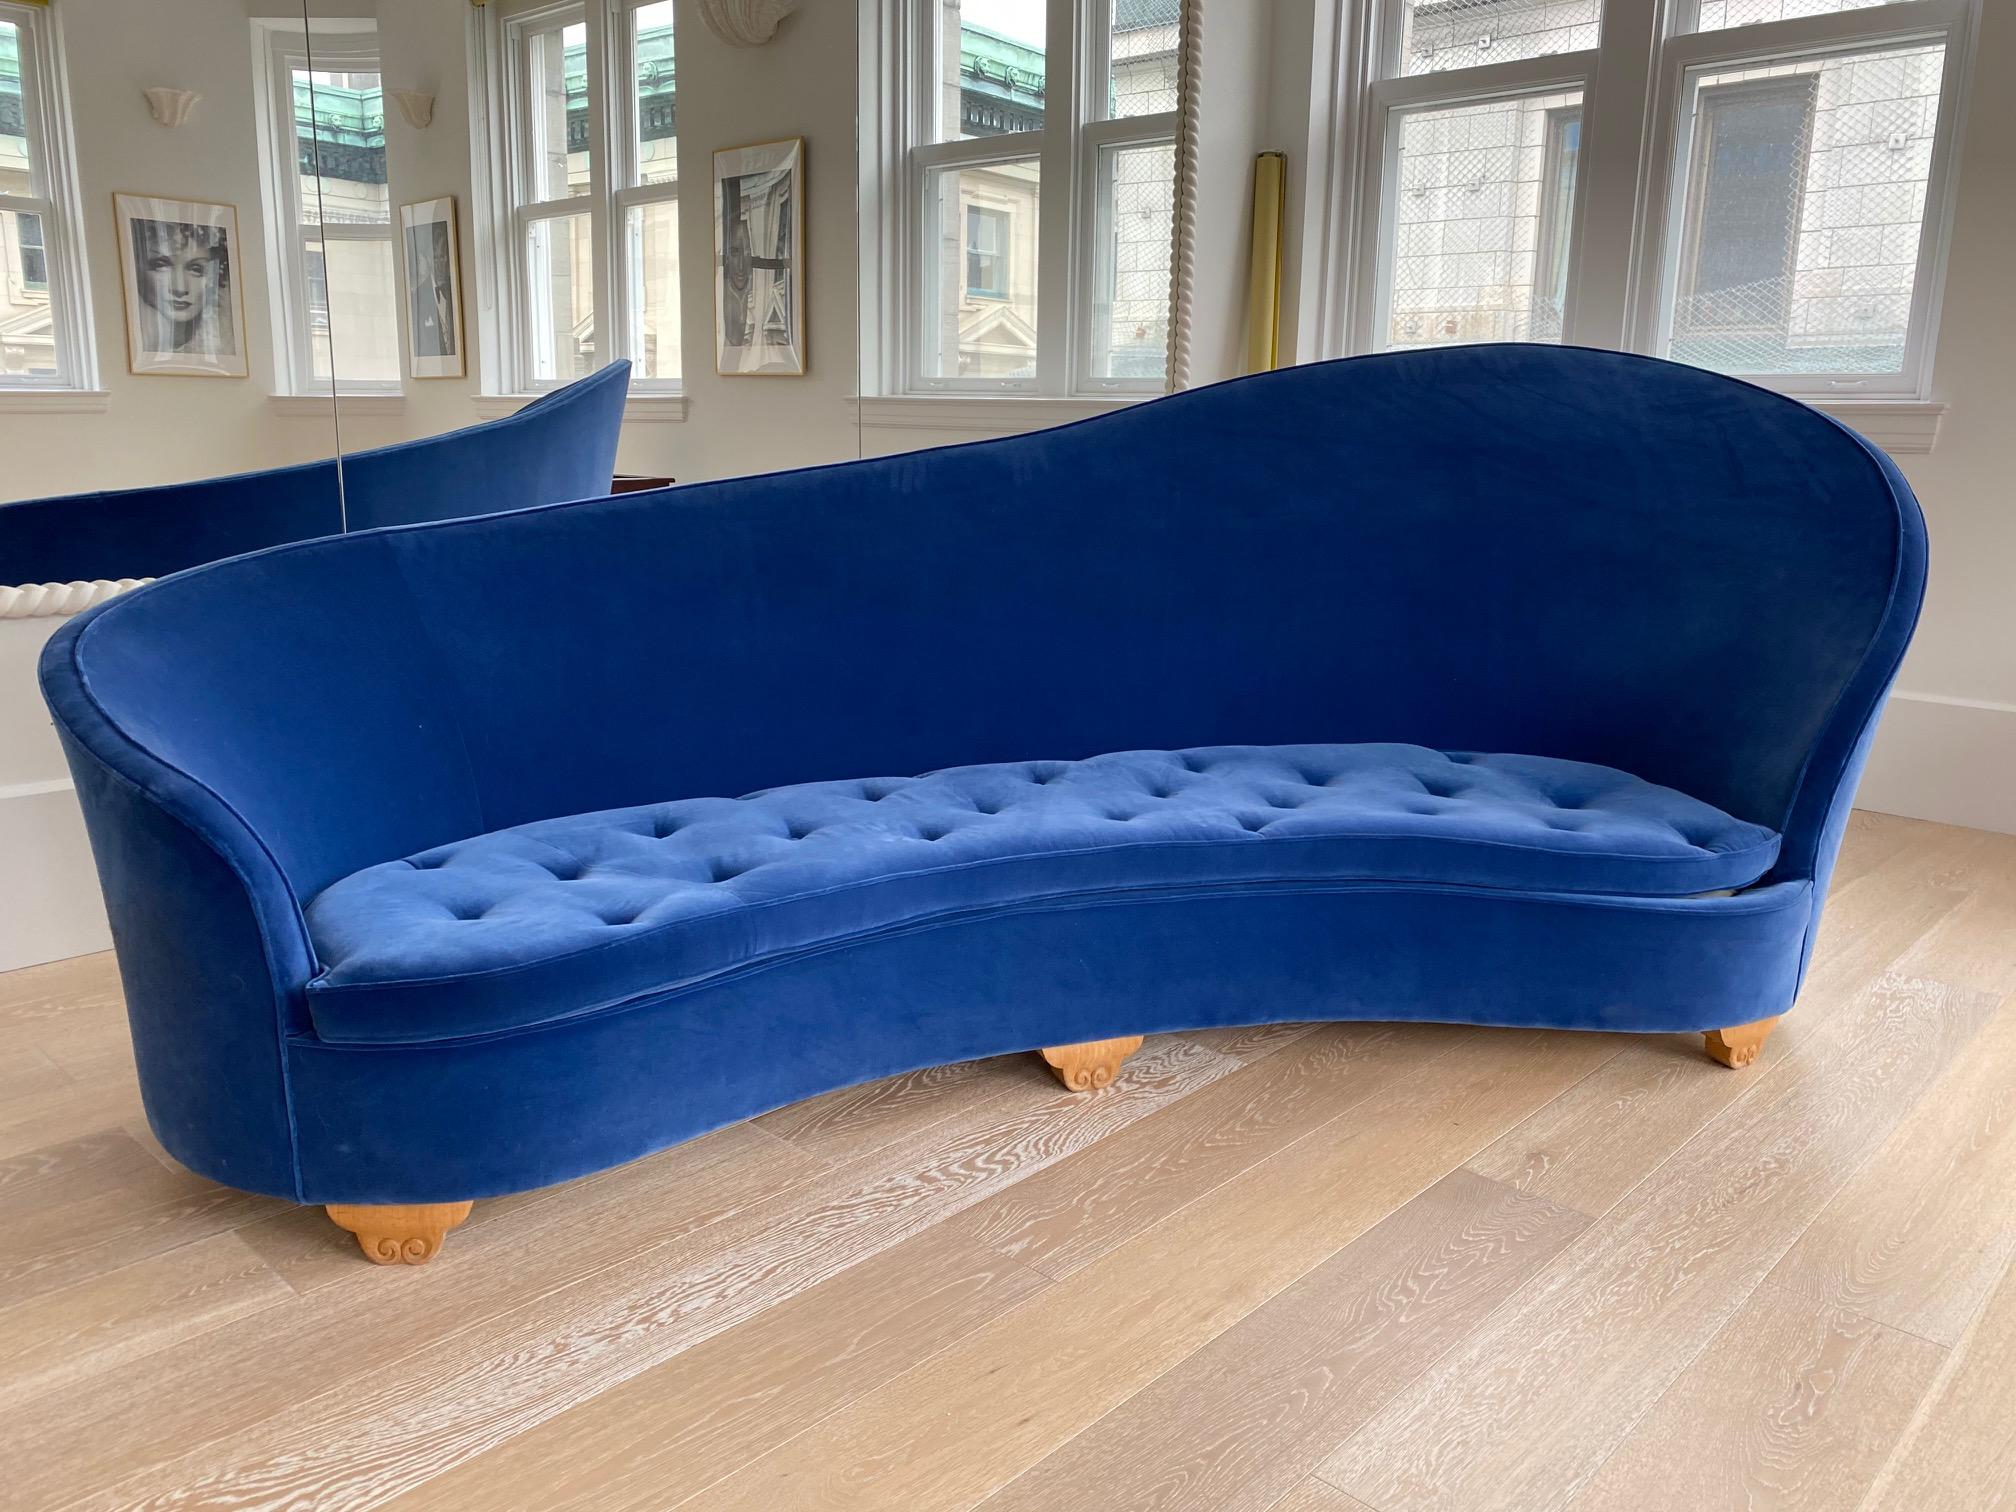 Pair of French Art Deco 1930s blue velvet kidney shaped sofa's resting on sycamore carved feet.
This is a true pair of sofa's, one is the mirror image of the other.